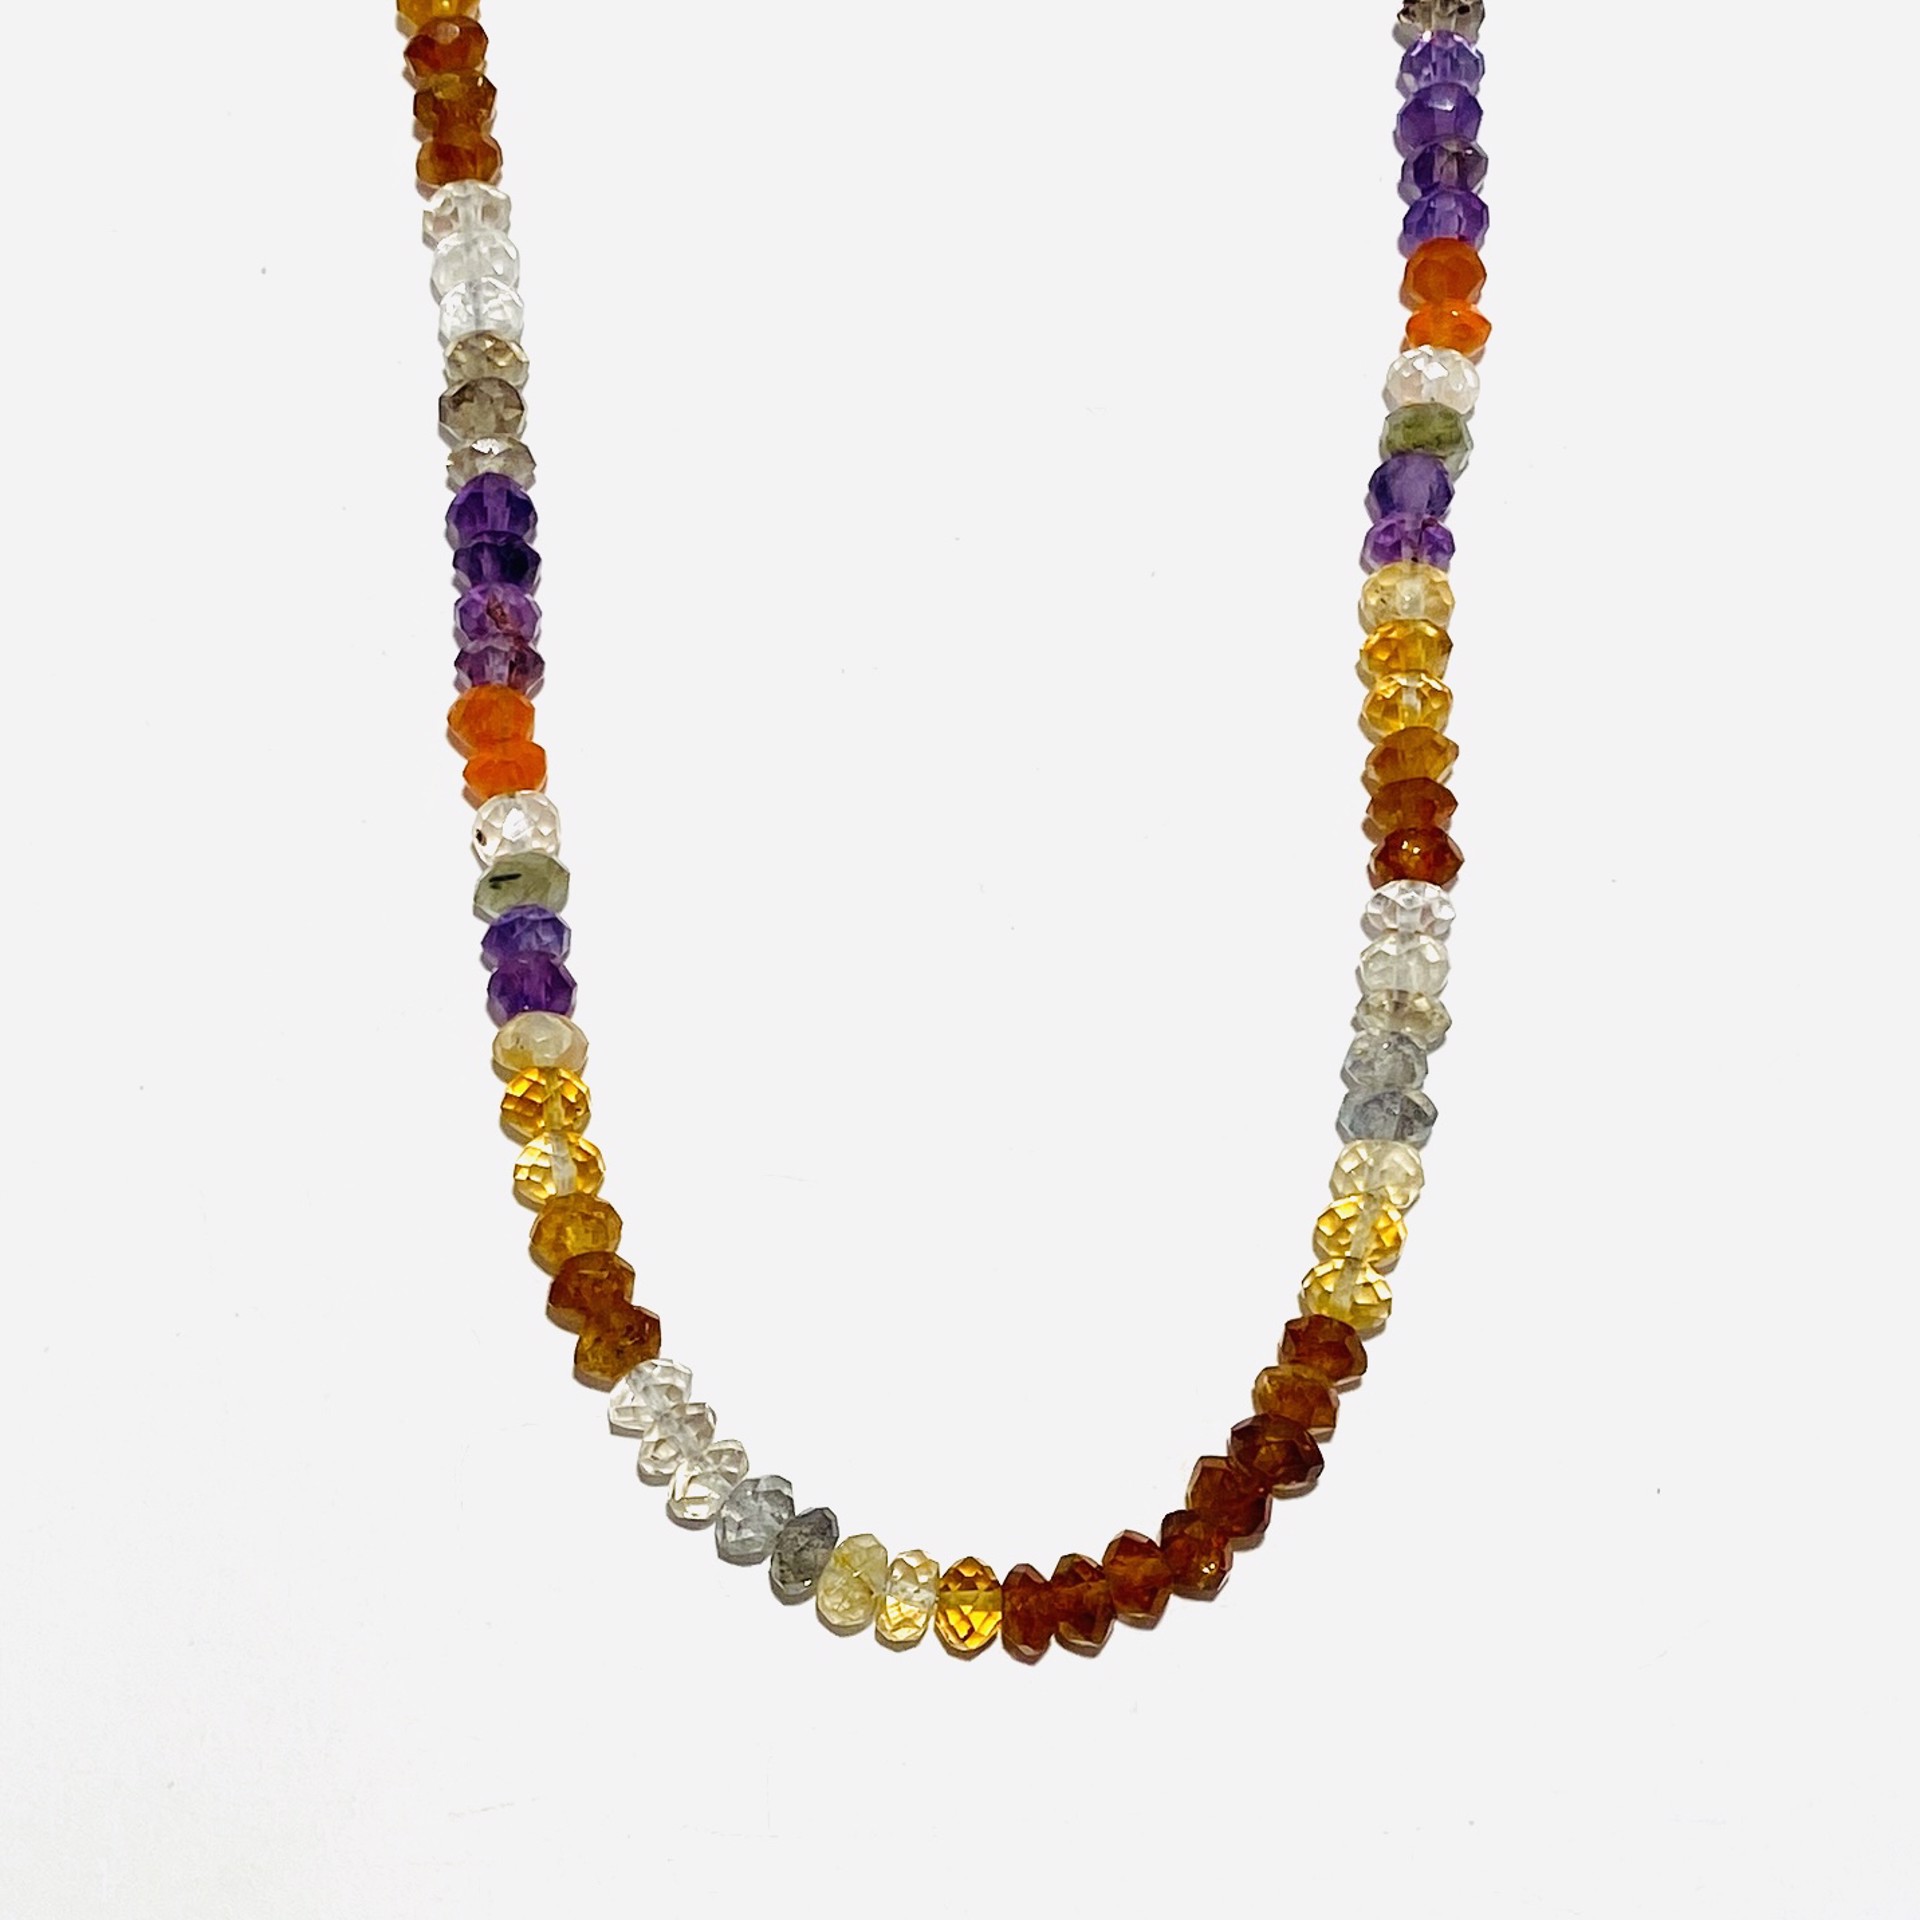 Faceted Mixed Gemstone Strand Necklace by Nance Trueworthy